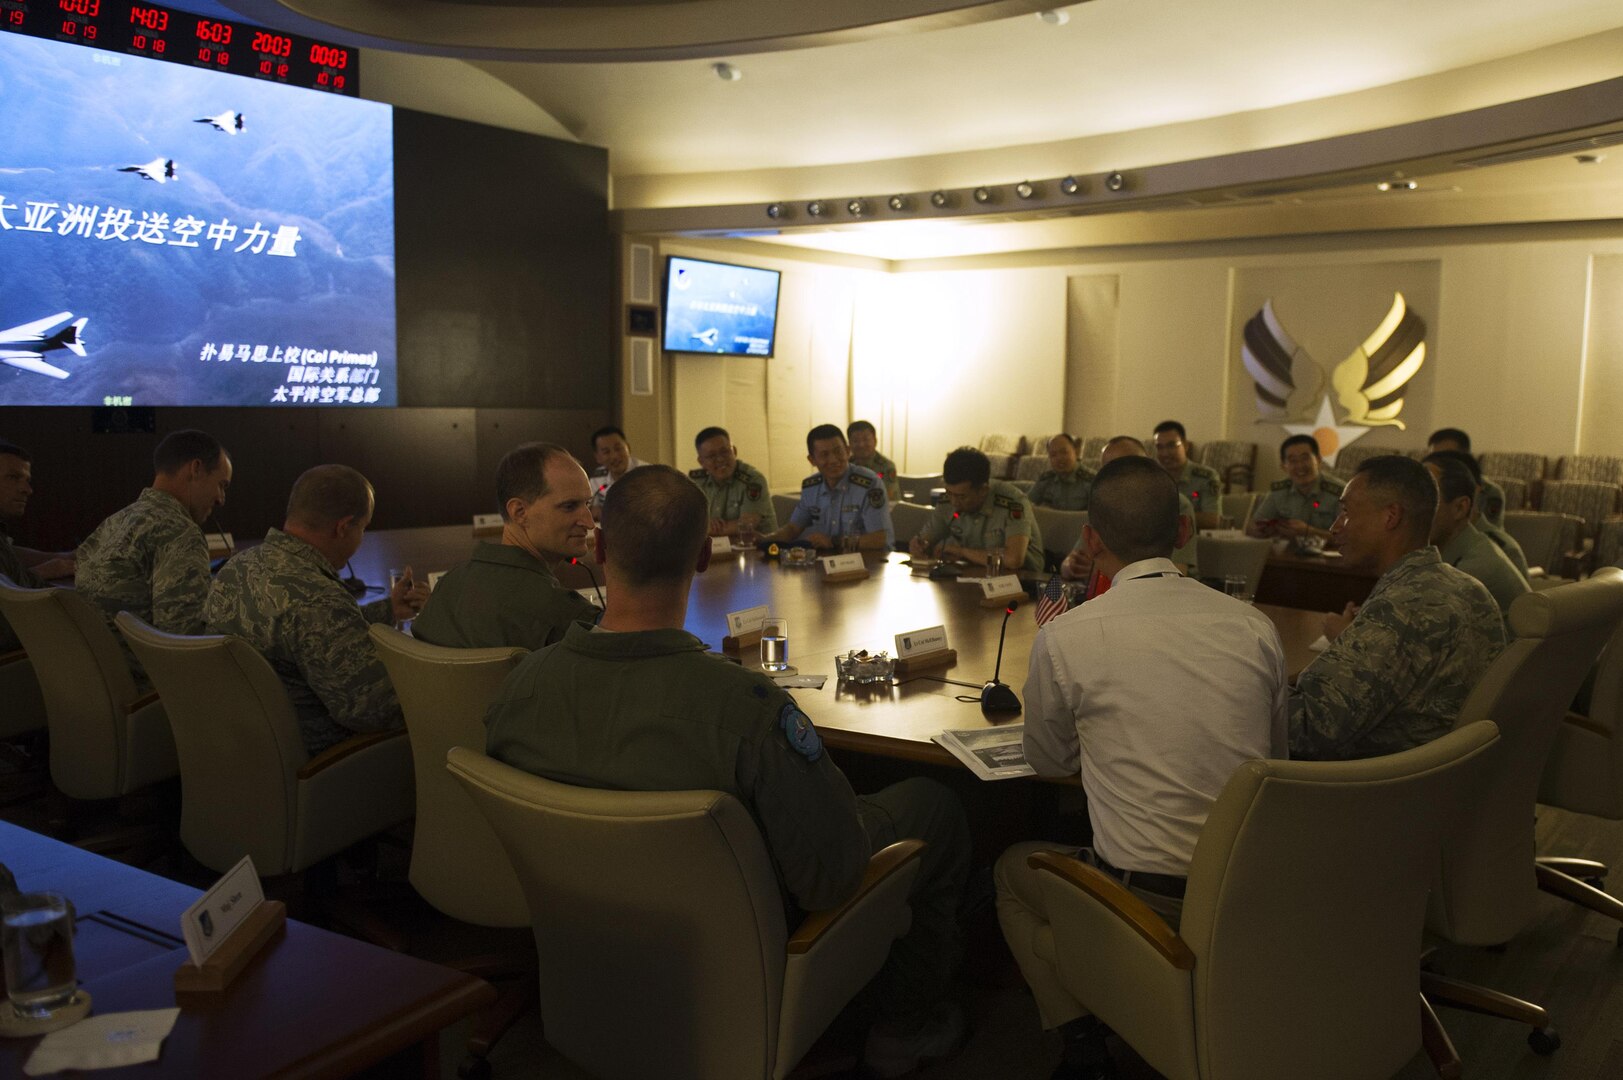 People's Liberation Army Senior Col. Hua Bo and U.S. Air Force Col. Art Primas, Pacific Air Forces International Affairs division chief, speak during a mid-level officer exchange at Joint Base Pearl Harbor-Hickam, Hawaii, Oct. 18, 2016. The PLA delegation visited PACAF as part of an annual exchange tour that included a stop at U.S. Pacific Command. (U.S. Air Force photo by Staff Sgt. Alexander Martinez)